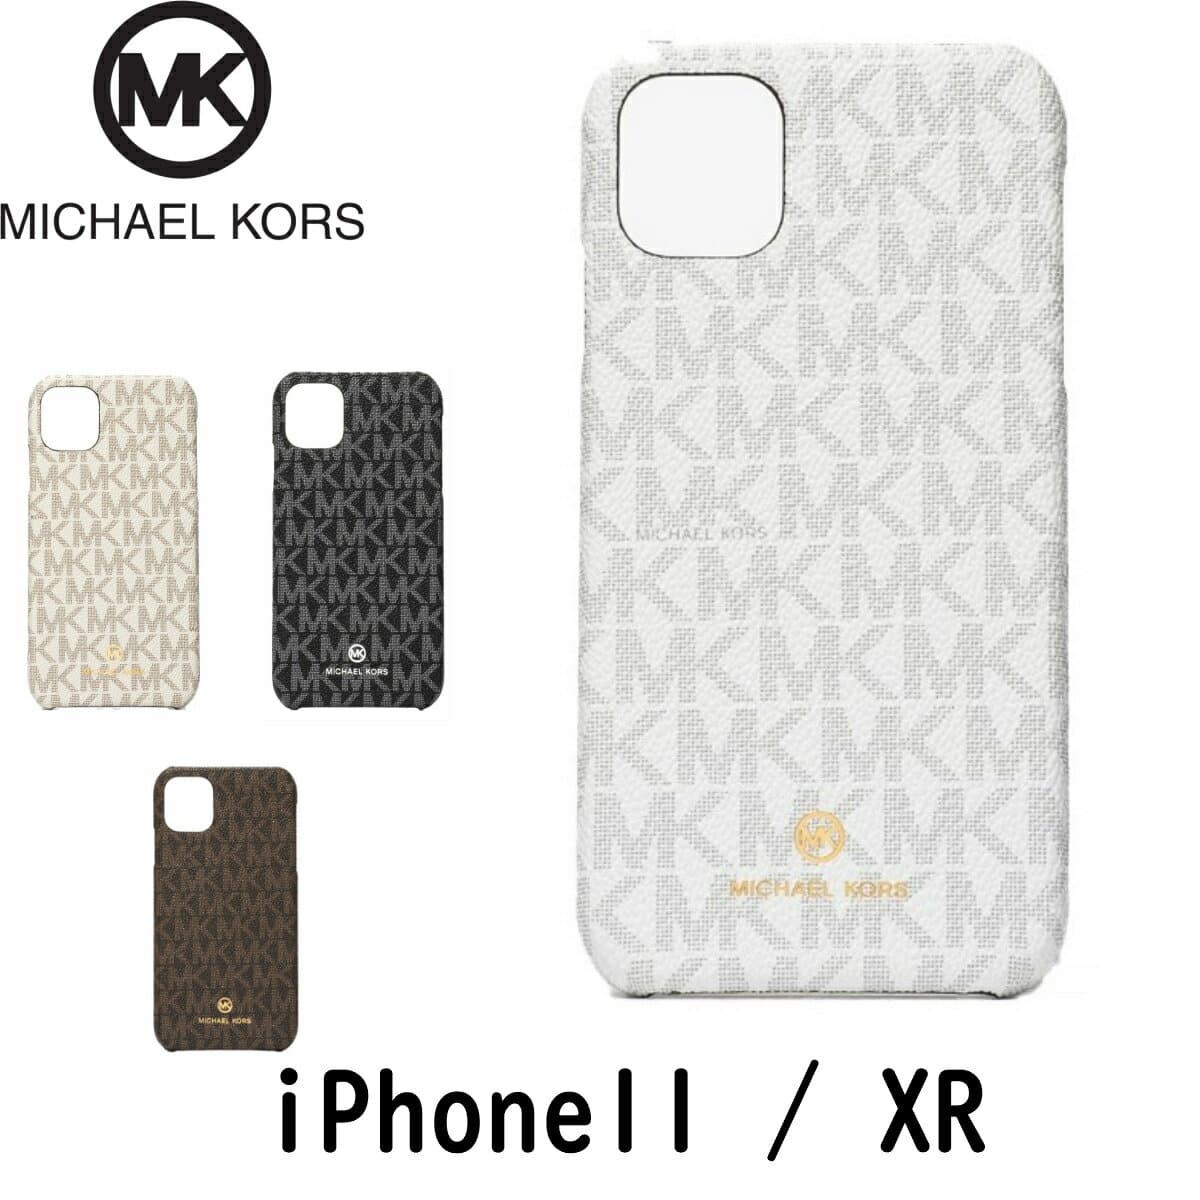 New]Michael Kors signature white vanilla brown Black Coe Ted Canbus  iPhone11 iPhoneXR case - BE FORWARD Store